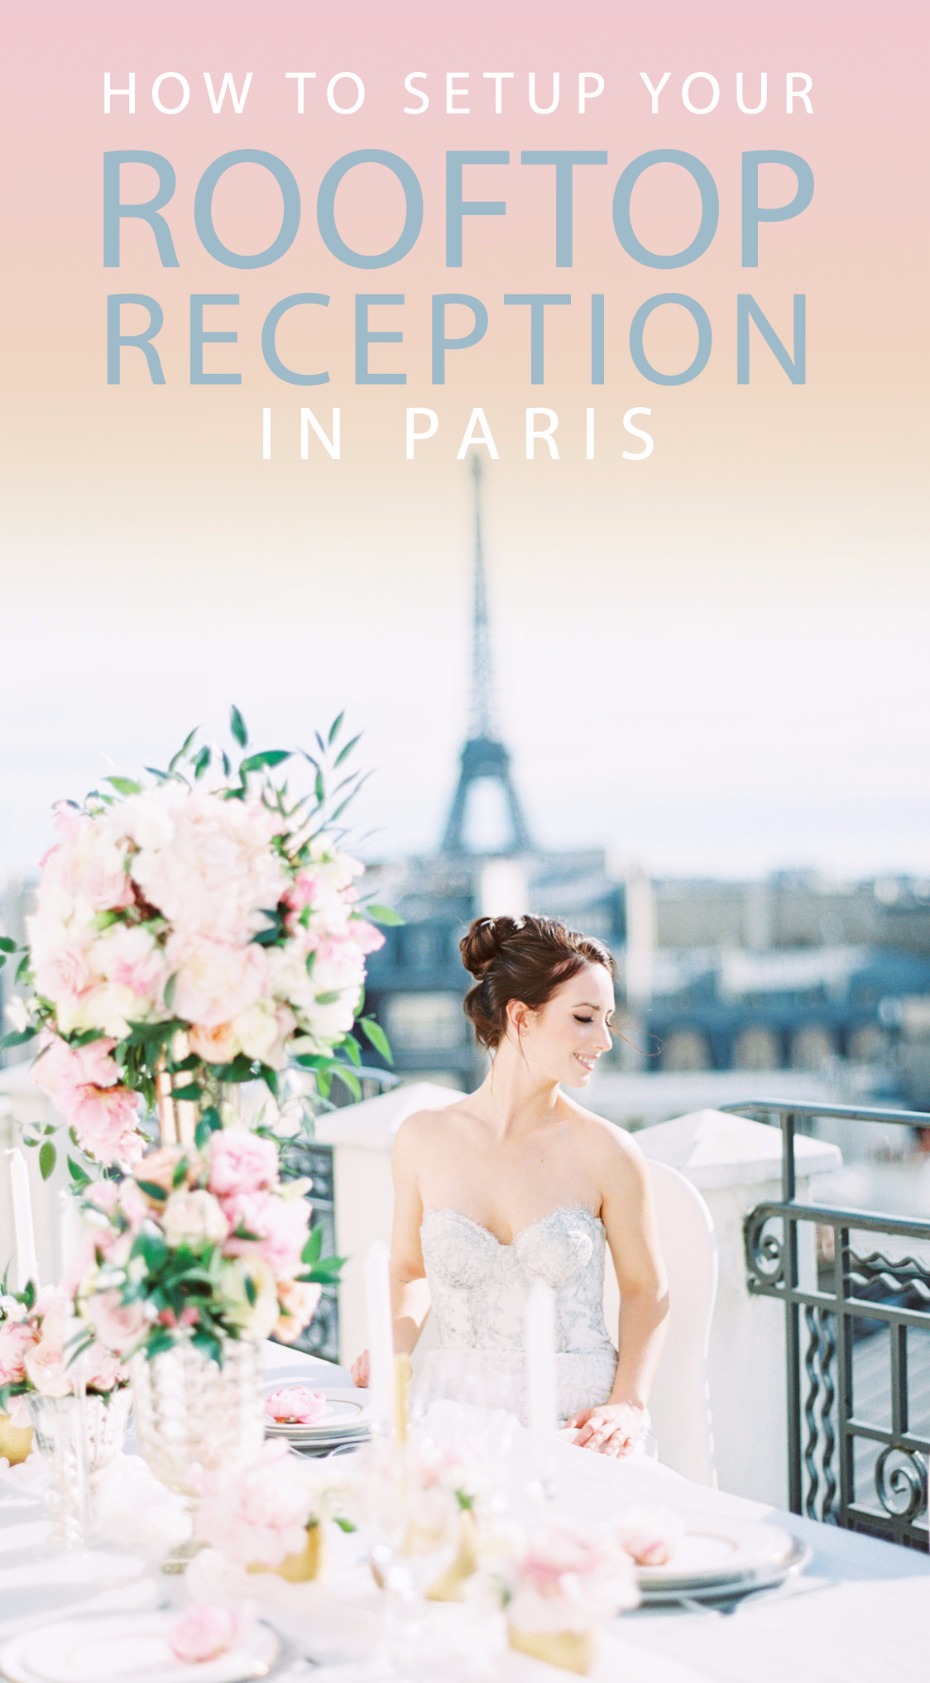 how to setup your rooftop reception in paris